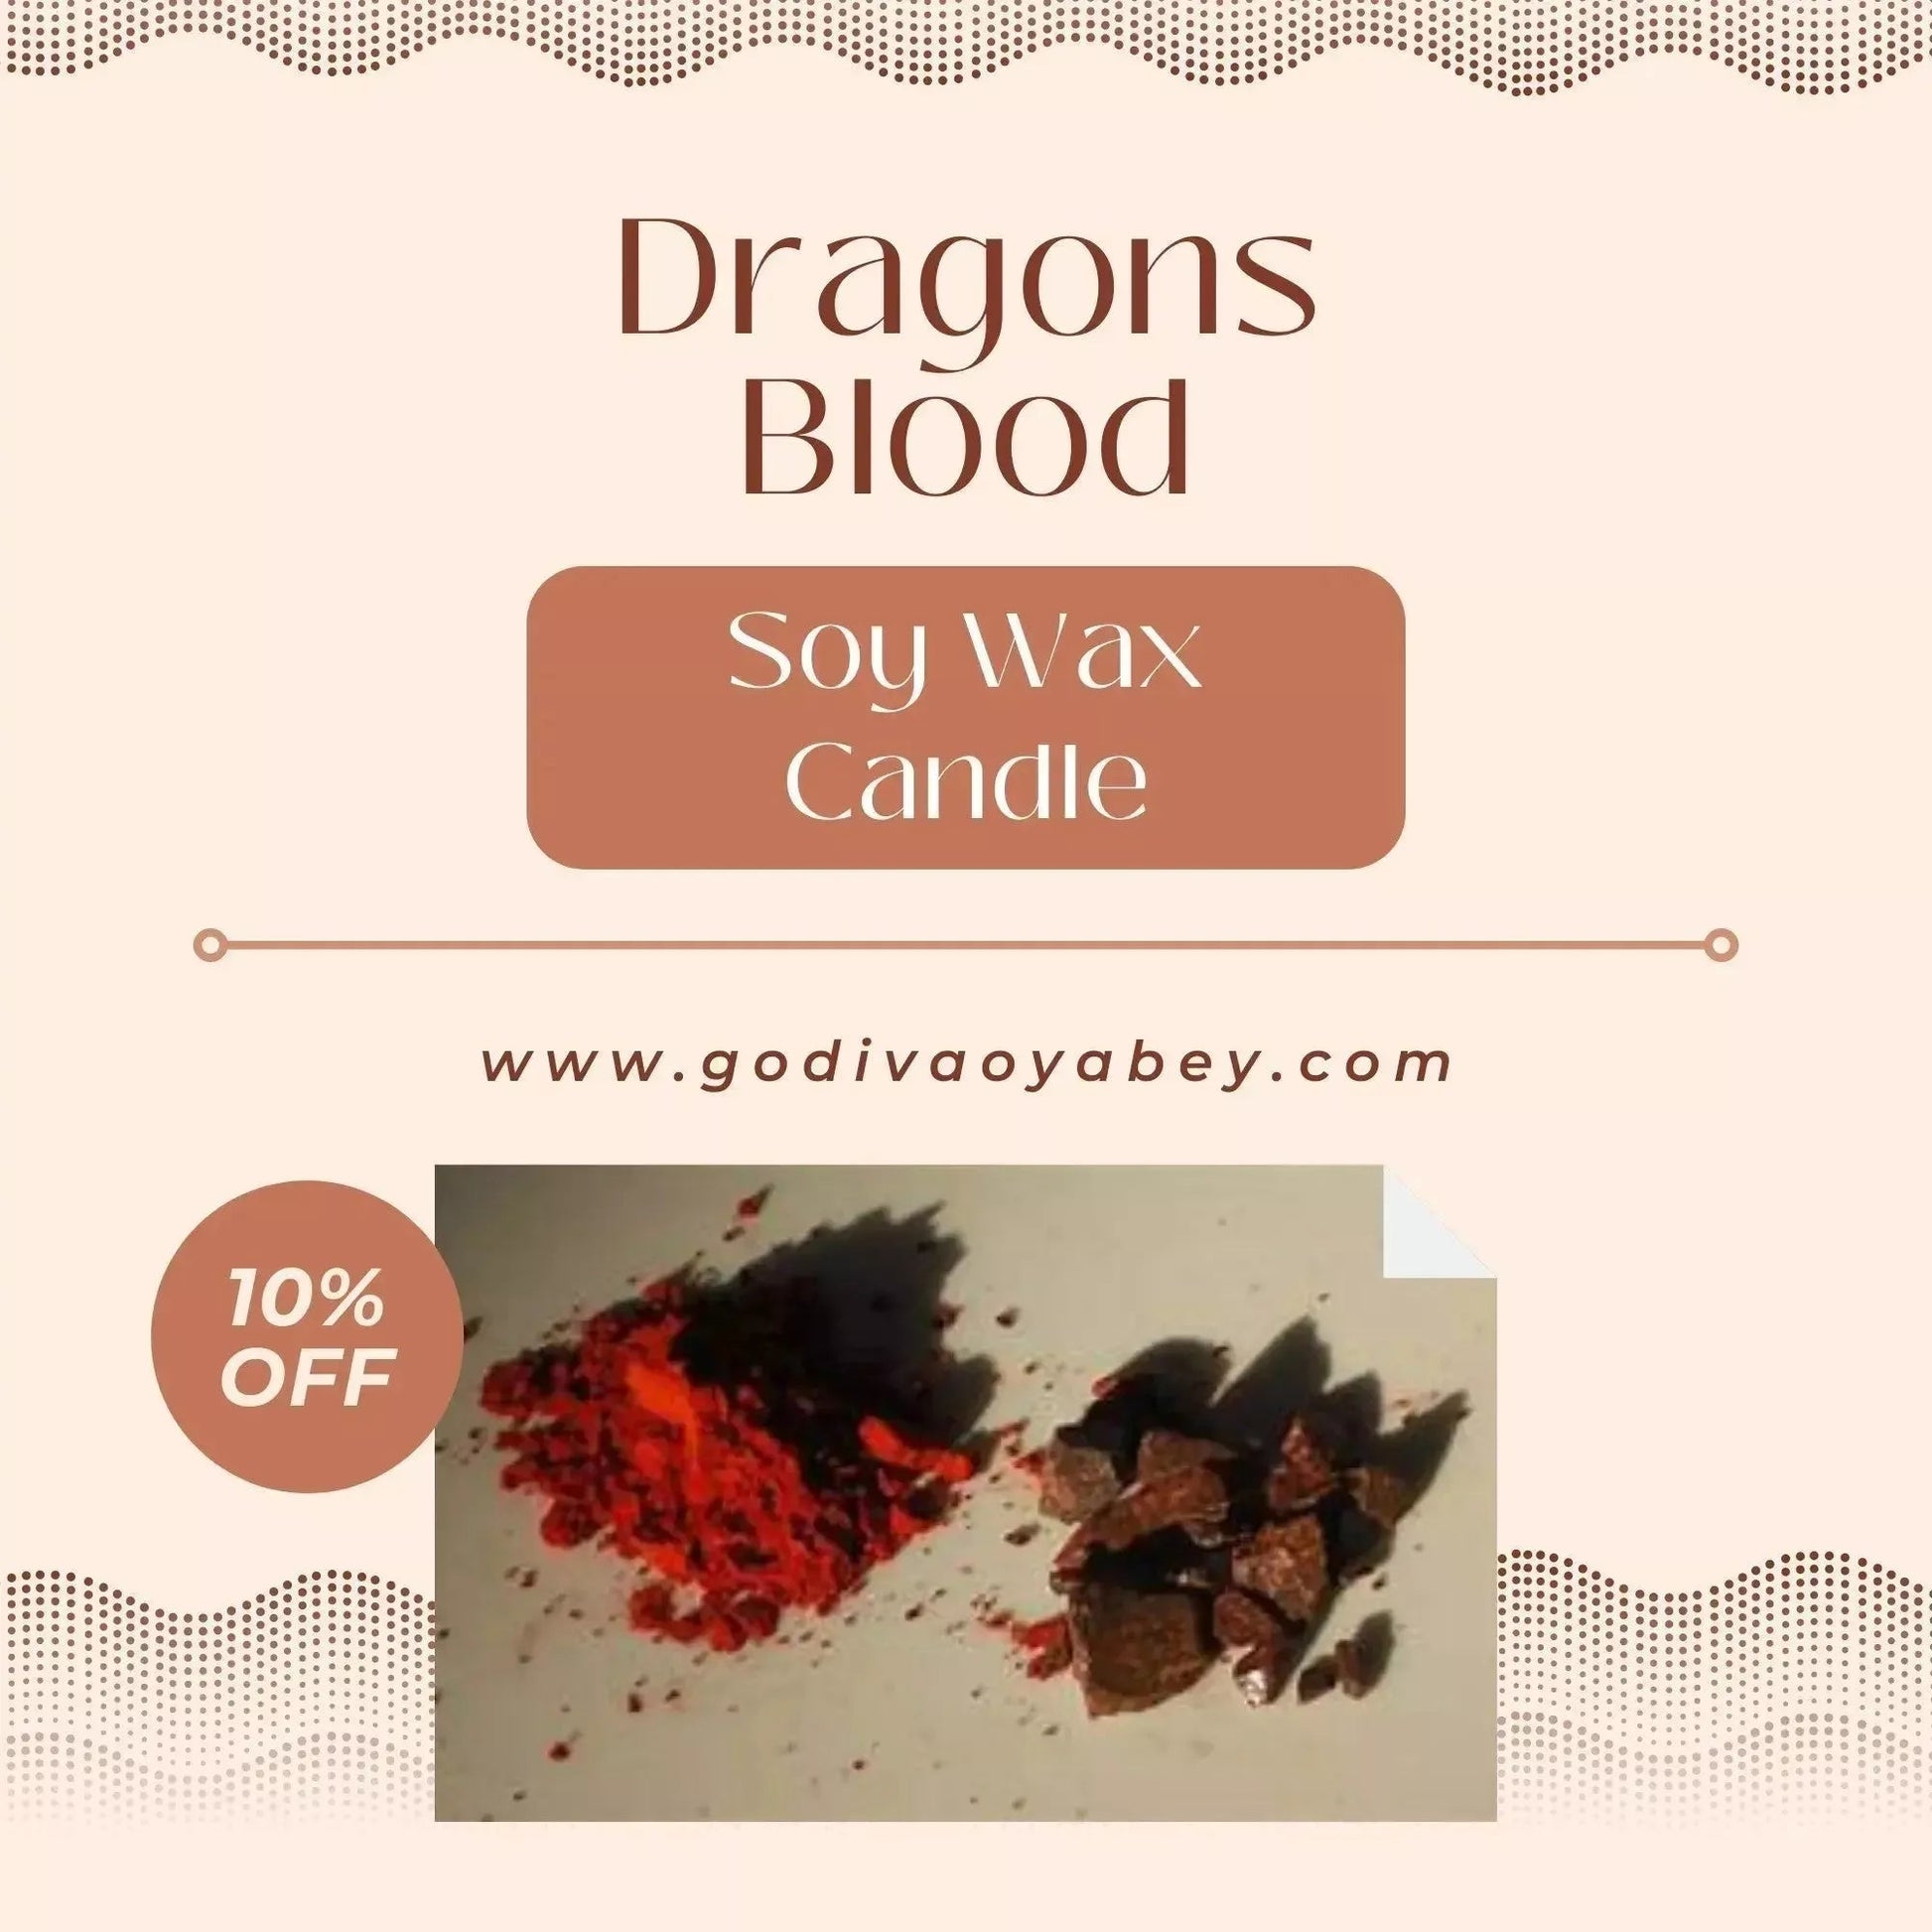 Scented Candles Dragons Blood Candle - Godiva Oya Bey